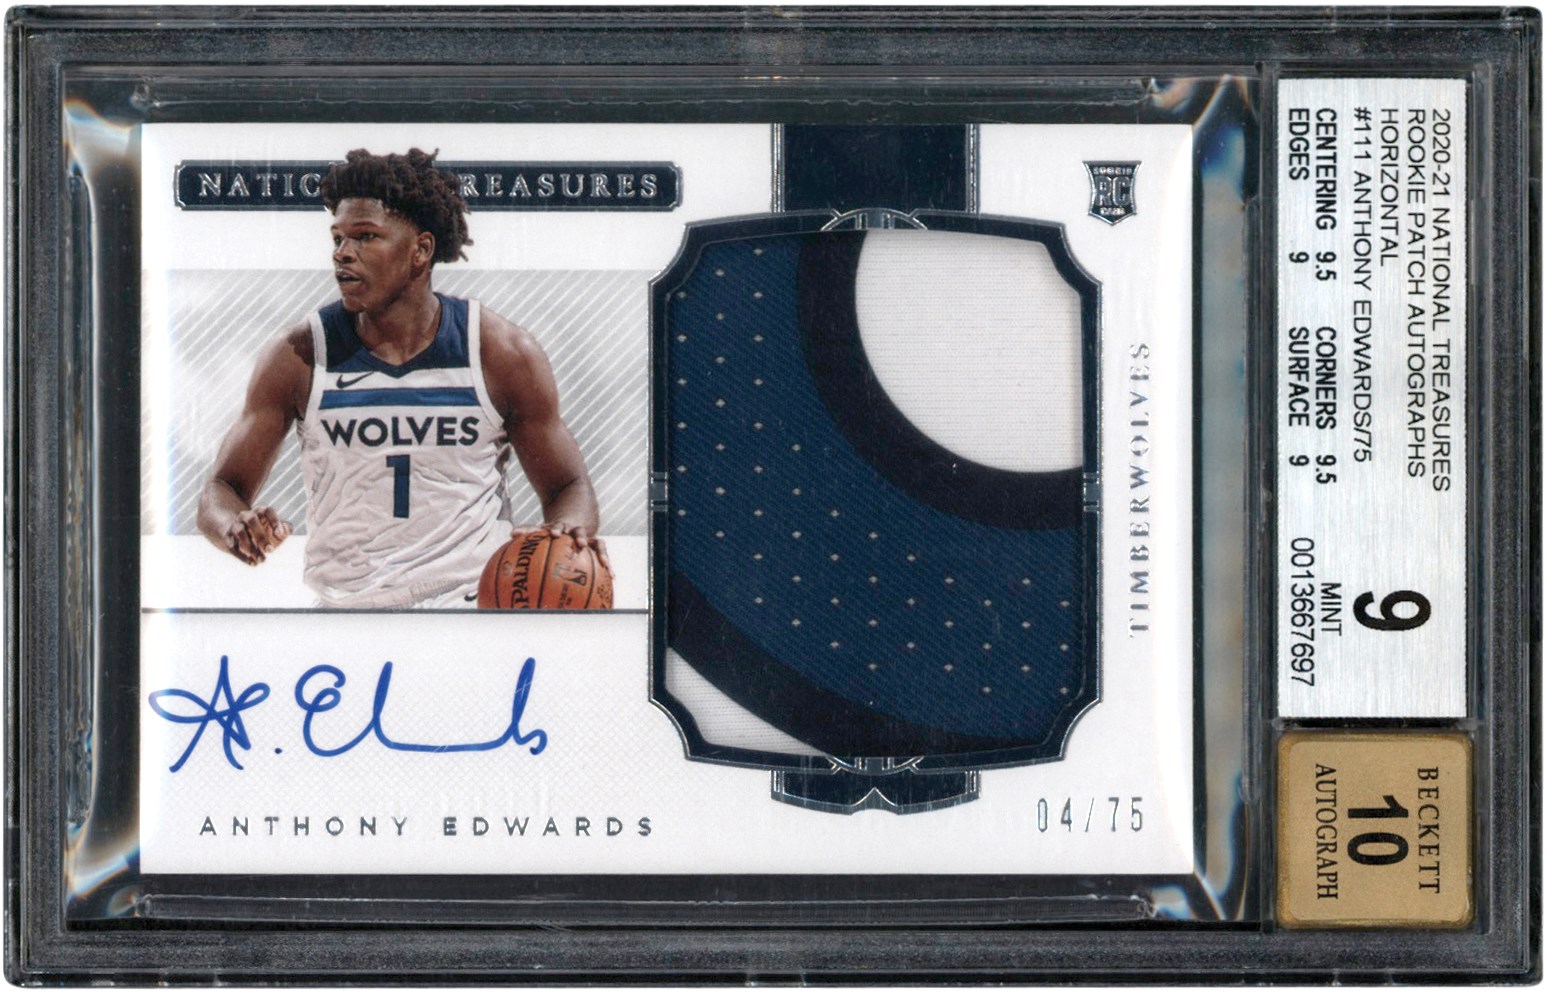 Basketball Cards - 2020-2021 National Treasures Basketball Rookie Patch Autographs Horizontal #111 Anthony Edwards Card #4/75 BGS MT 9 Auto 10